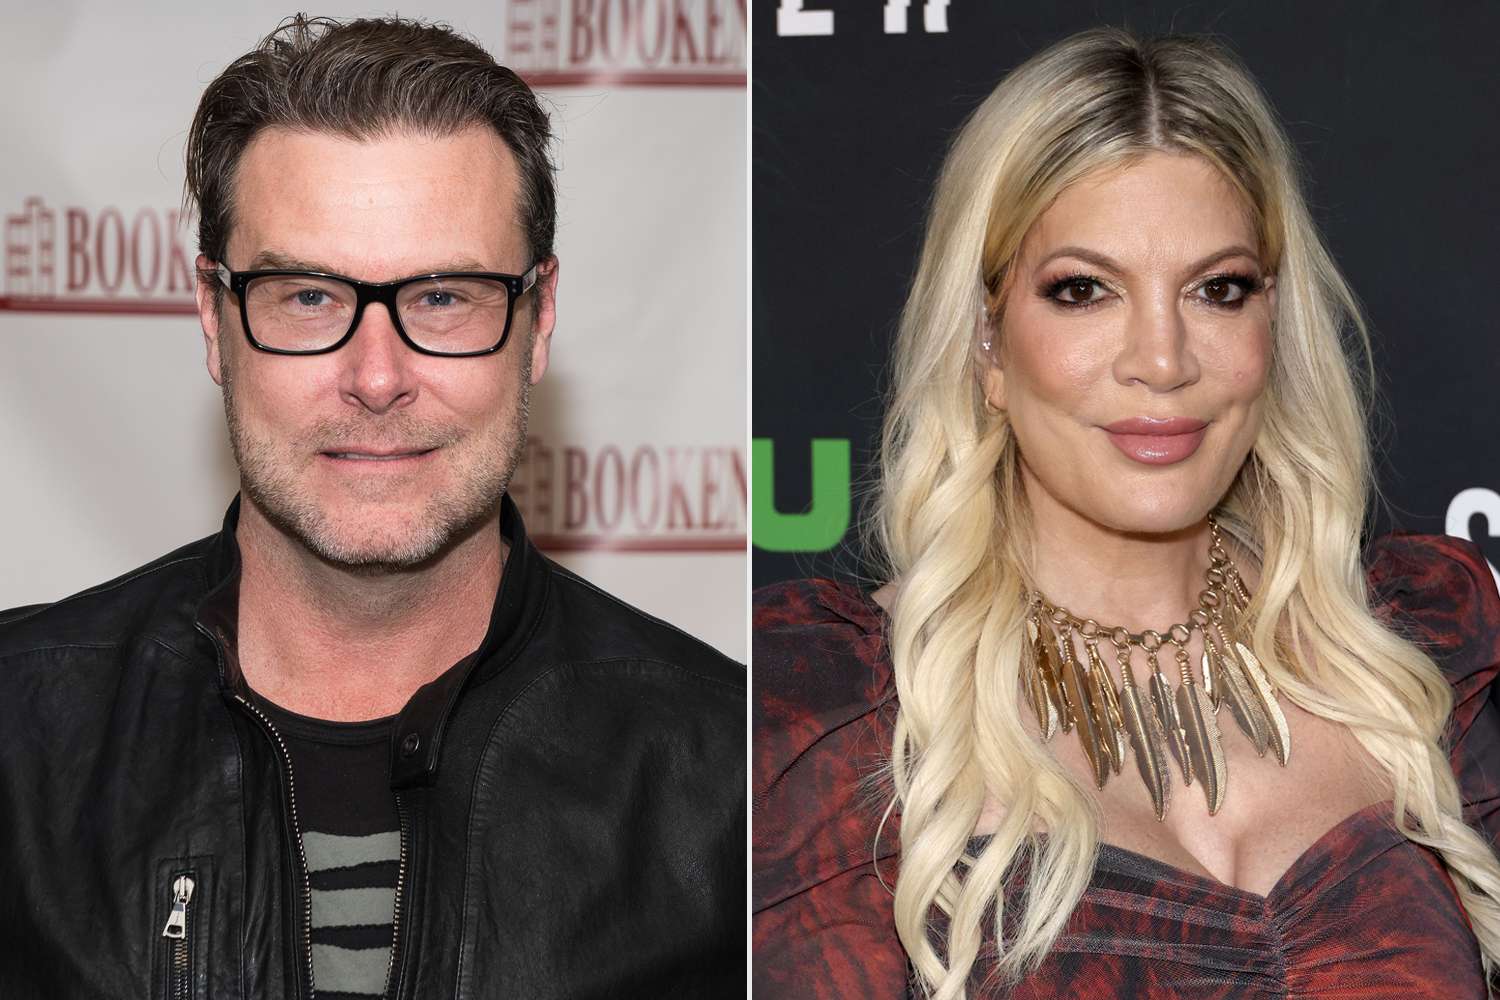 Tori Spelling And Dean McDermott Spotted Together For The First Time In Nearly A Year